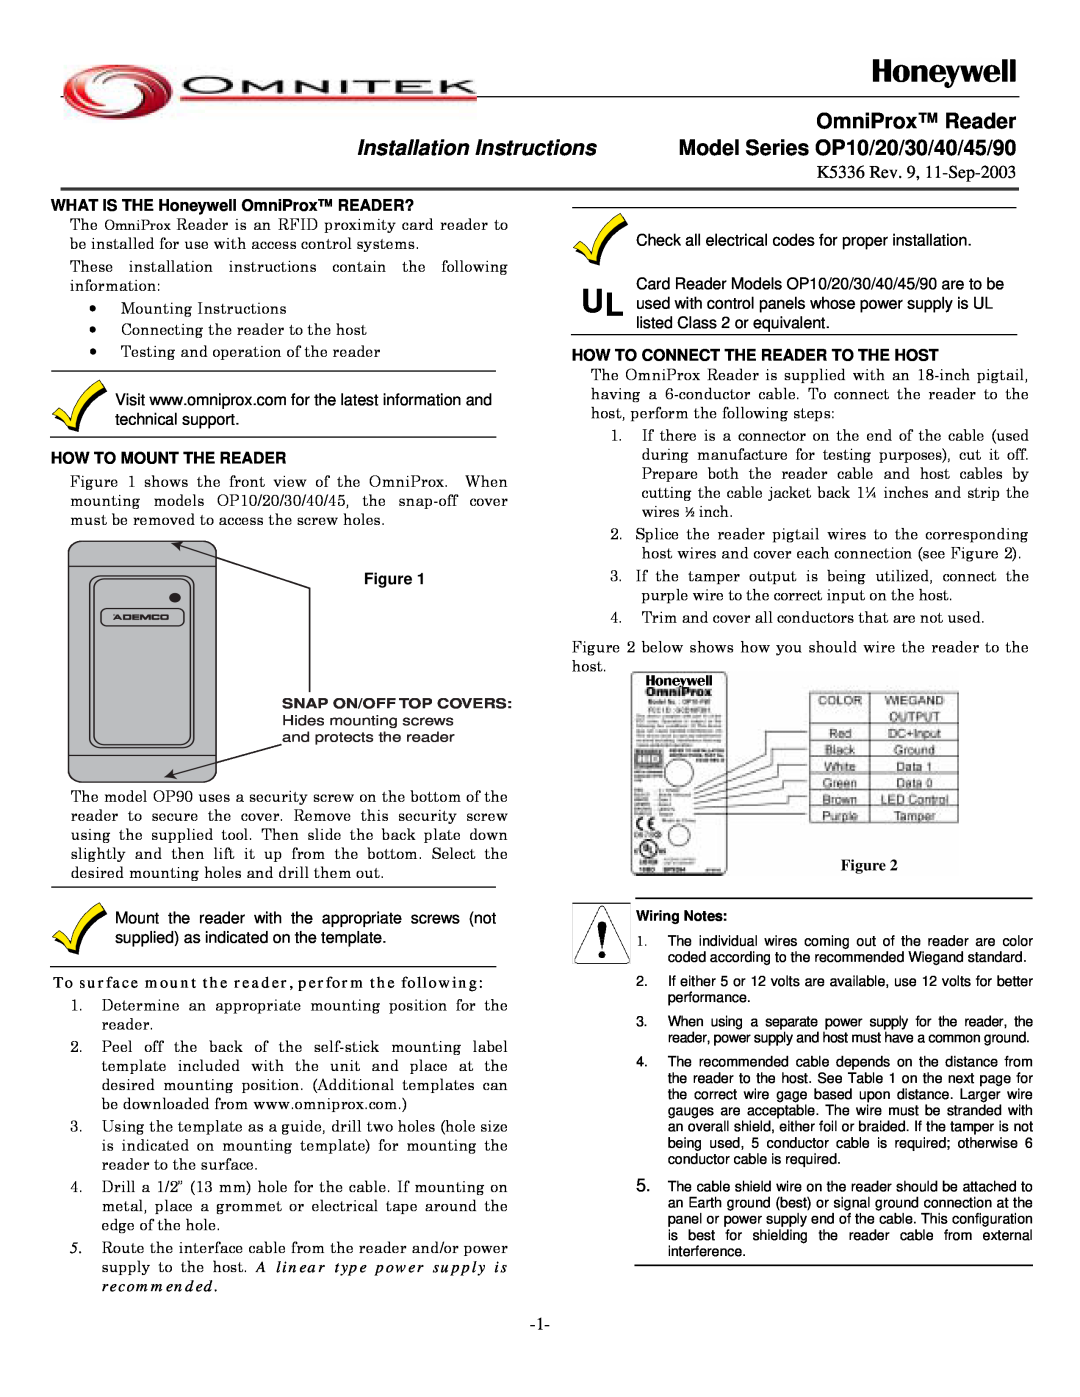 OmniTek OP40 manual WHAT IS THE Honeywell OmniProx READER?, How To Mount The Reader, How To Connect The Reader To The Host 